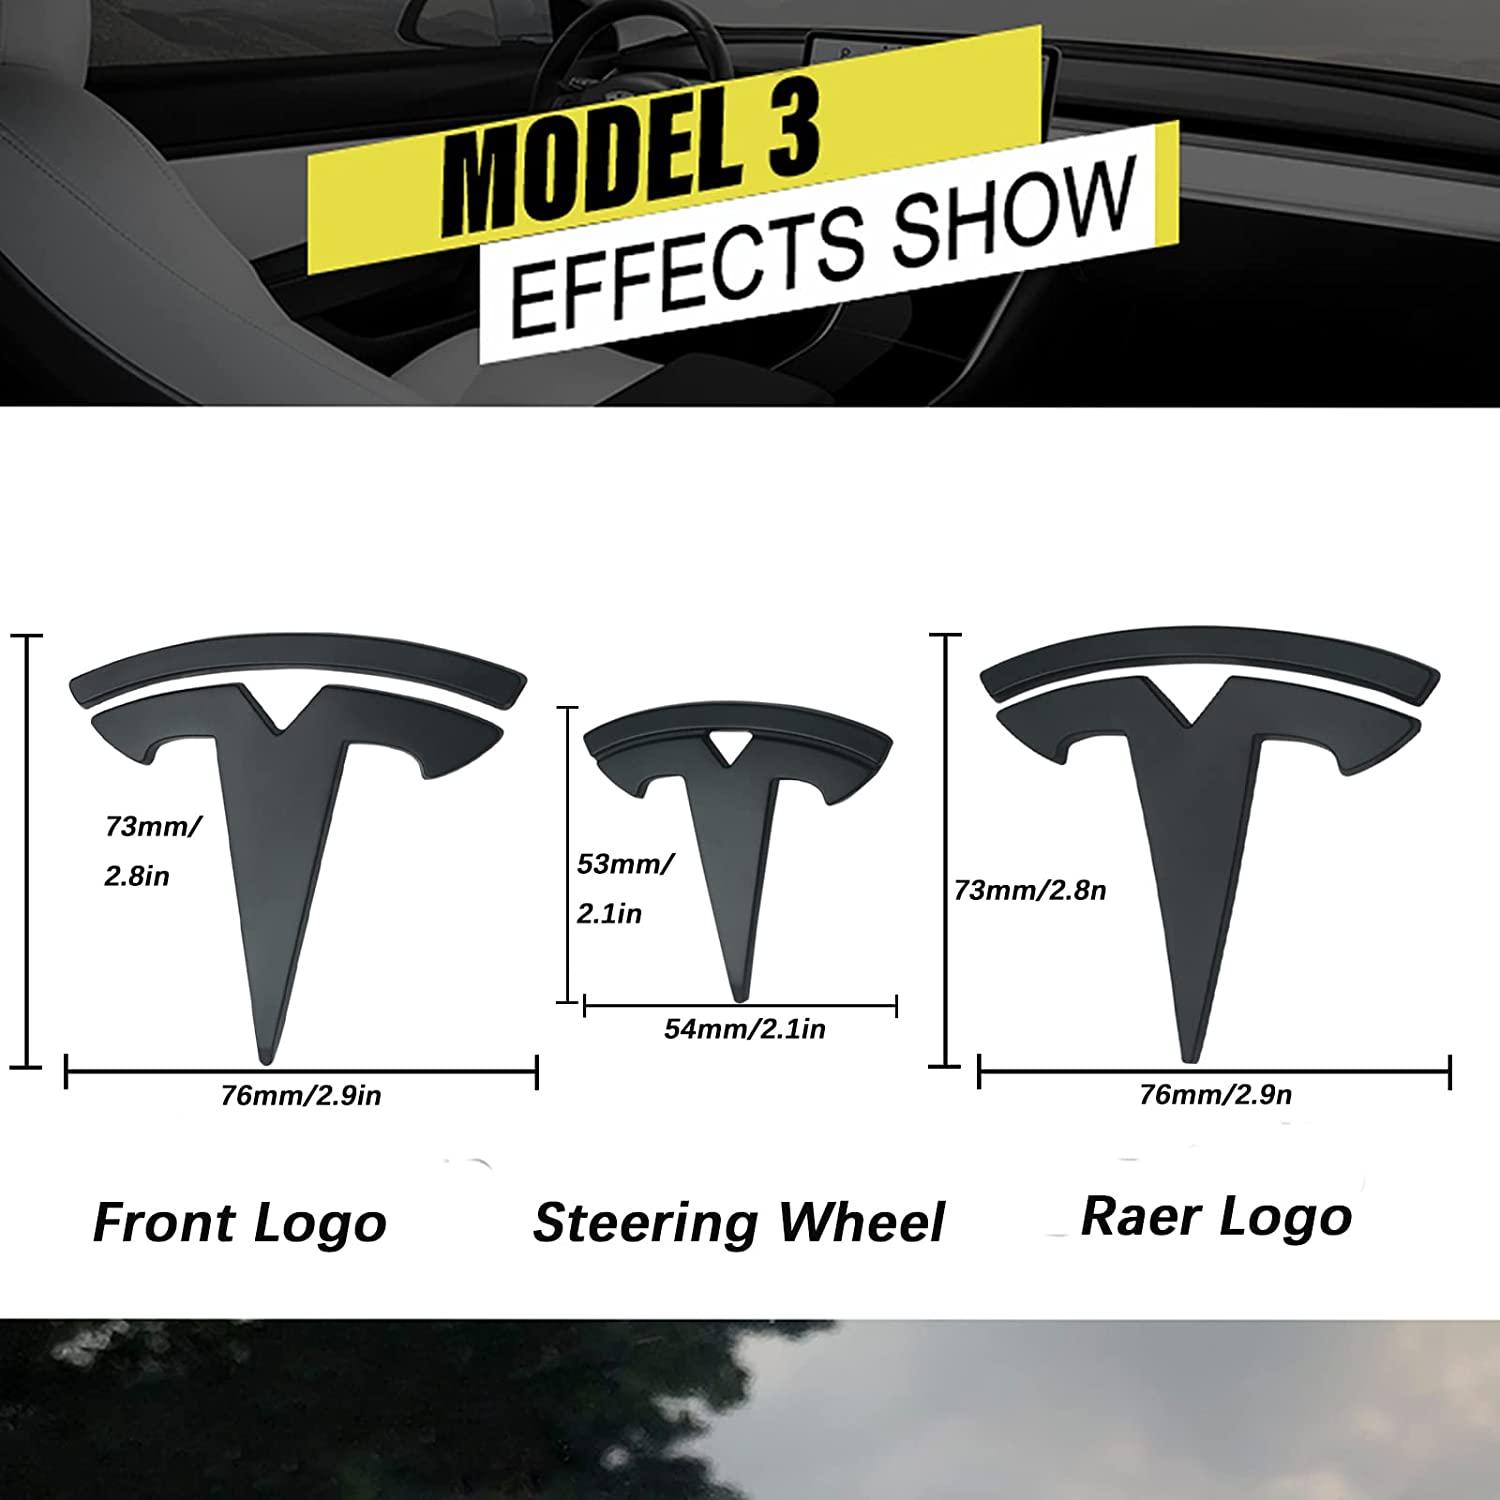 T Badge Covers For Model Y - TESDADDY